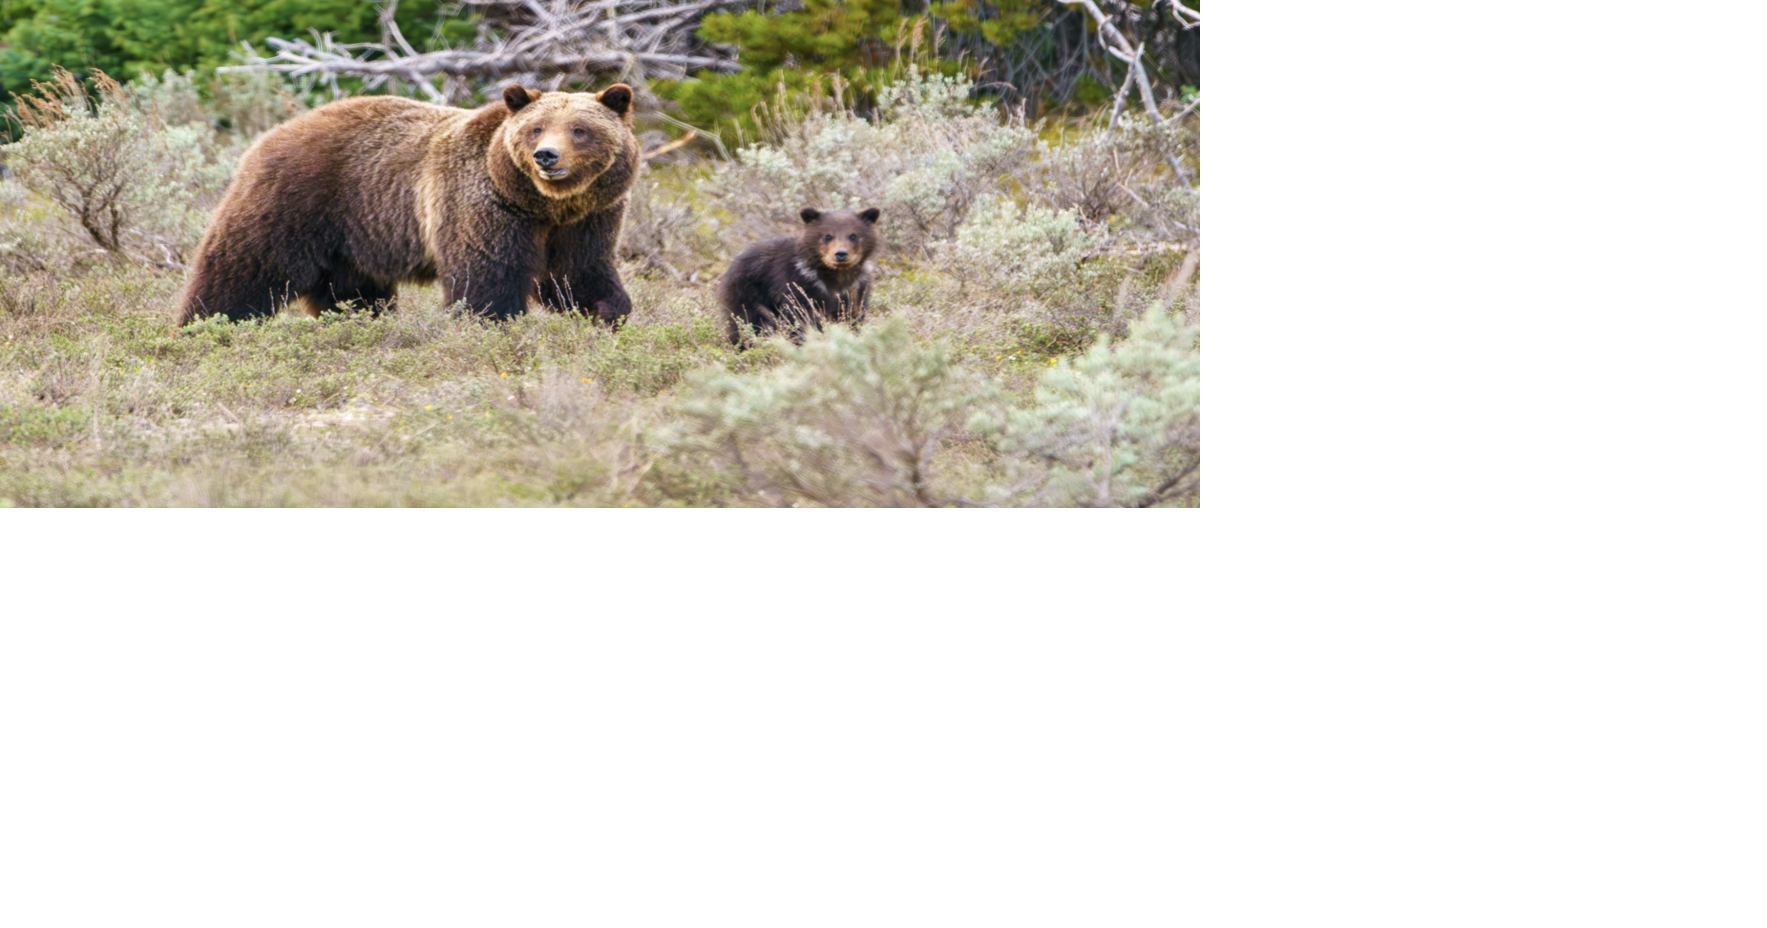 Grizzly 399 Oldest known grizzly mother in the Greater Yellowstone